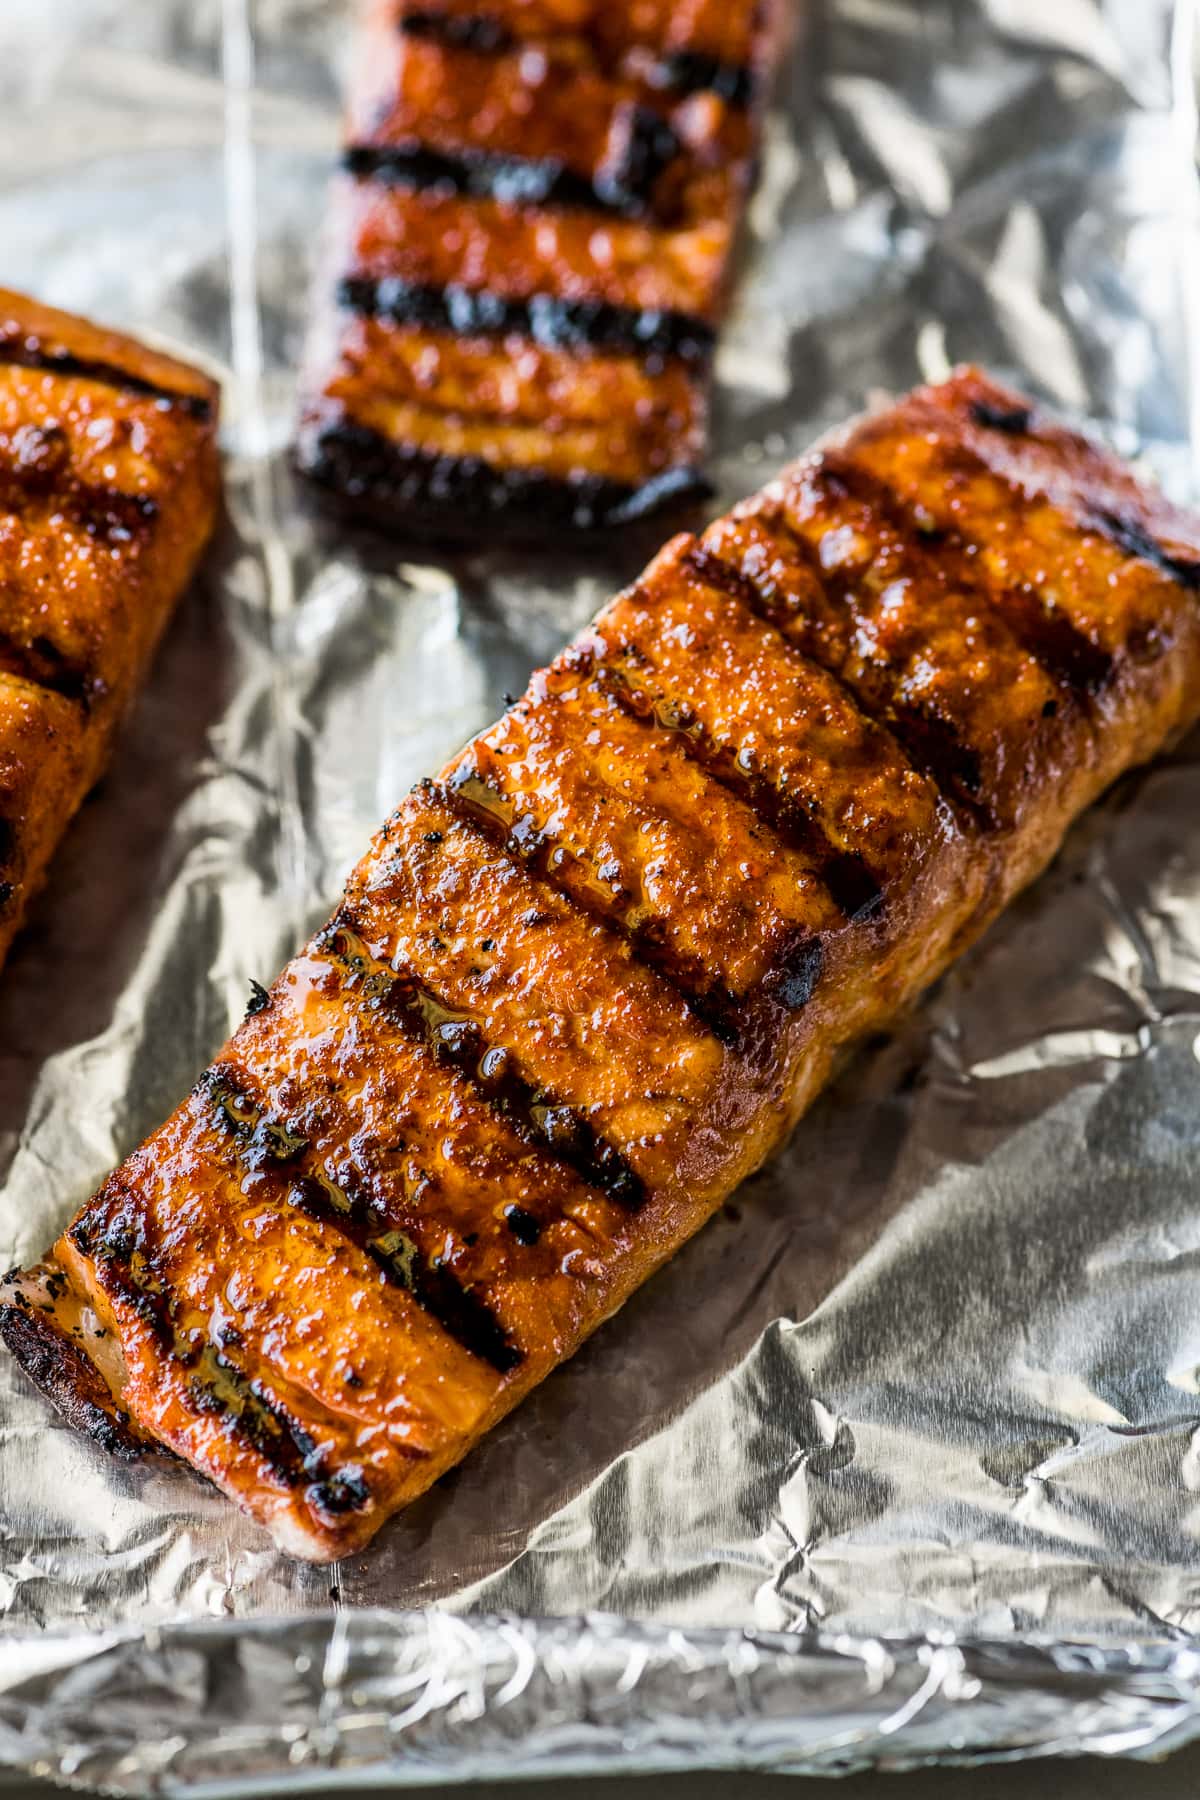 A fillet of grilled salmon ready to be served.